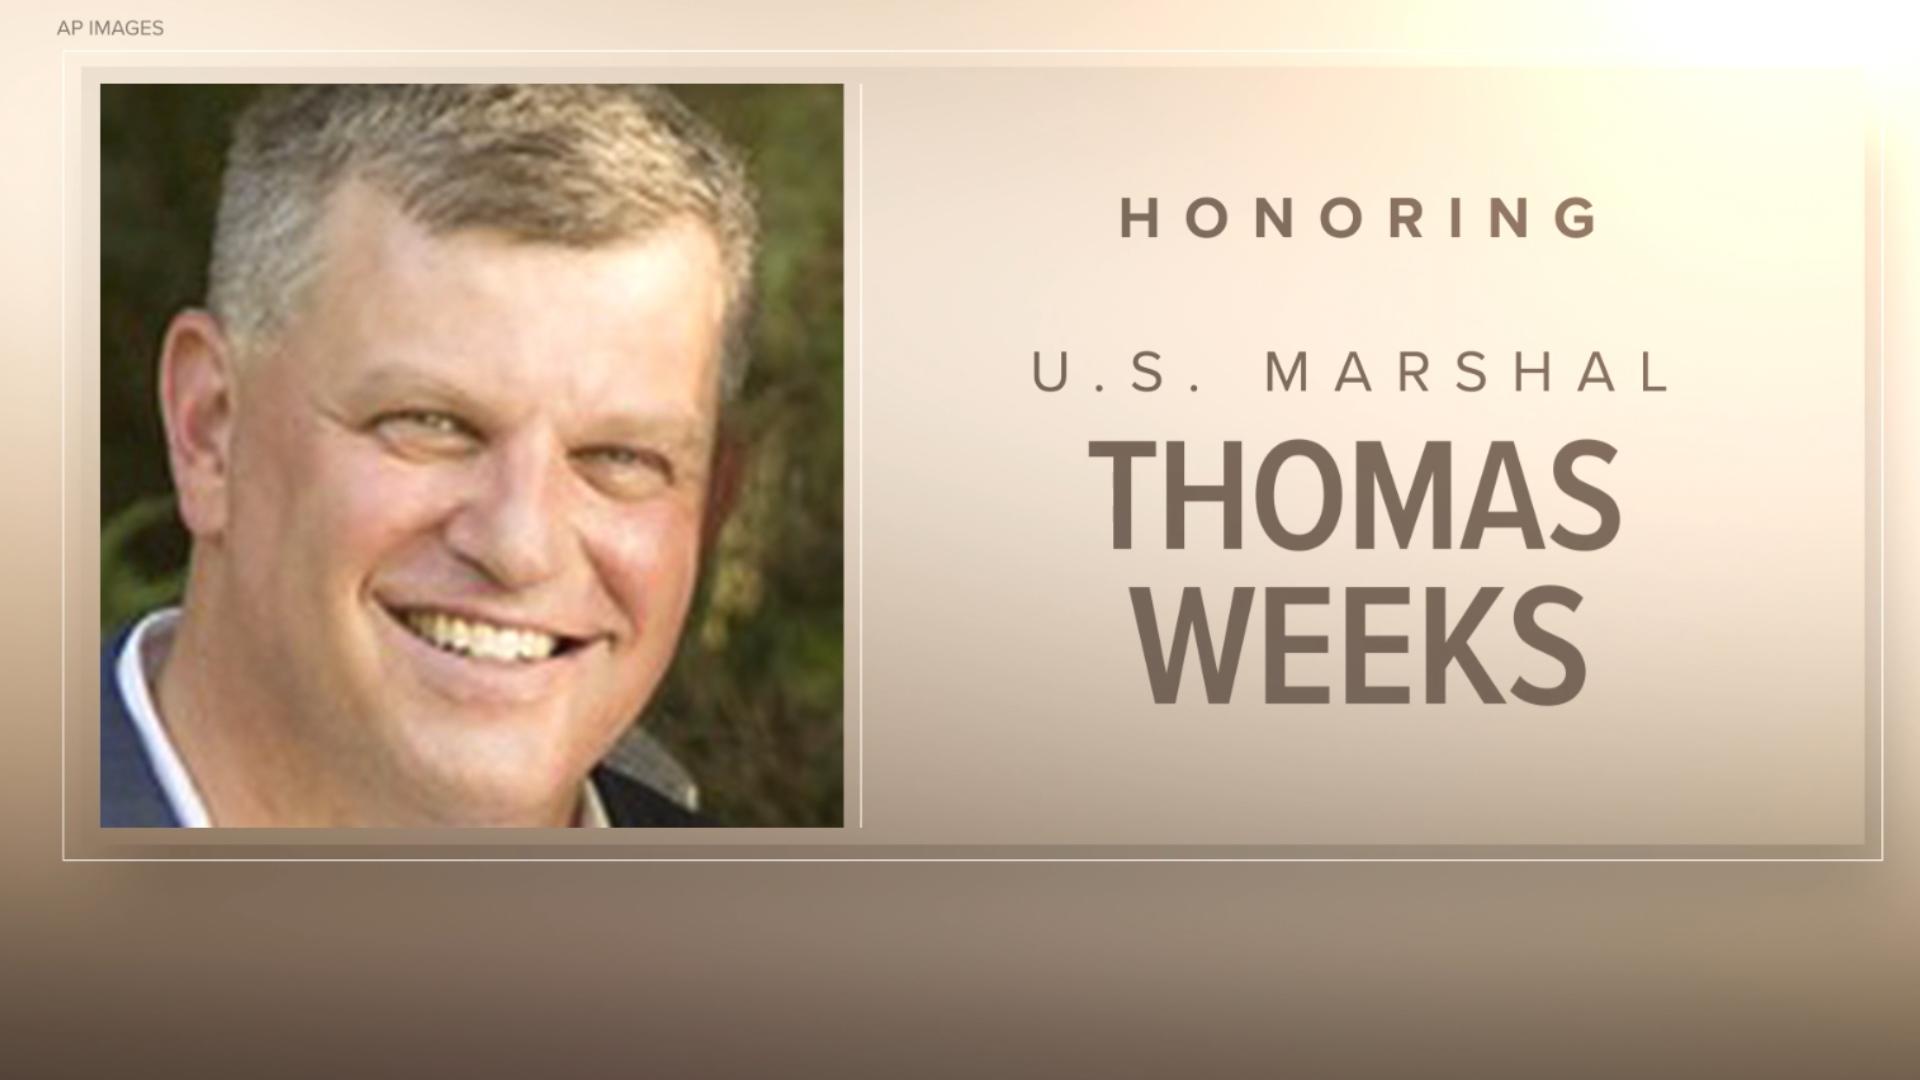 Family, friends and colleagues gather in Charlotte to remember Deputy U.S. Marshal Thomas Weeks, one of four law enforcement officers killed in last week's shooting.